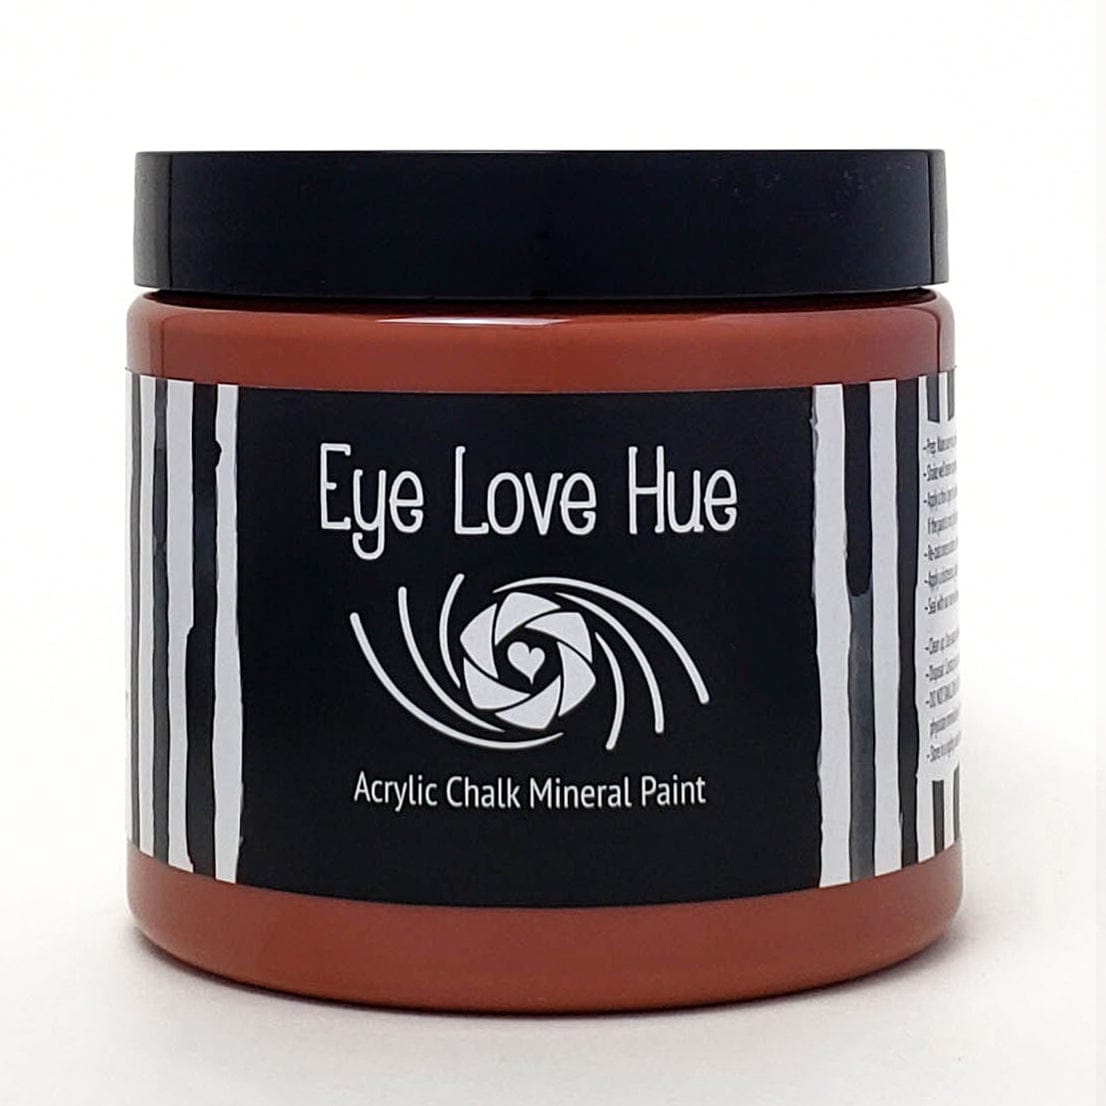 Eye Love Hue Paint & Products 16 oz Rusty Nail Acrylic Mineral Paint Chalk Paint Clay Paint